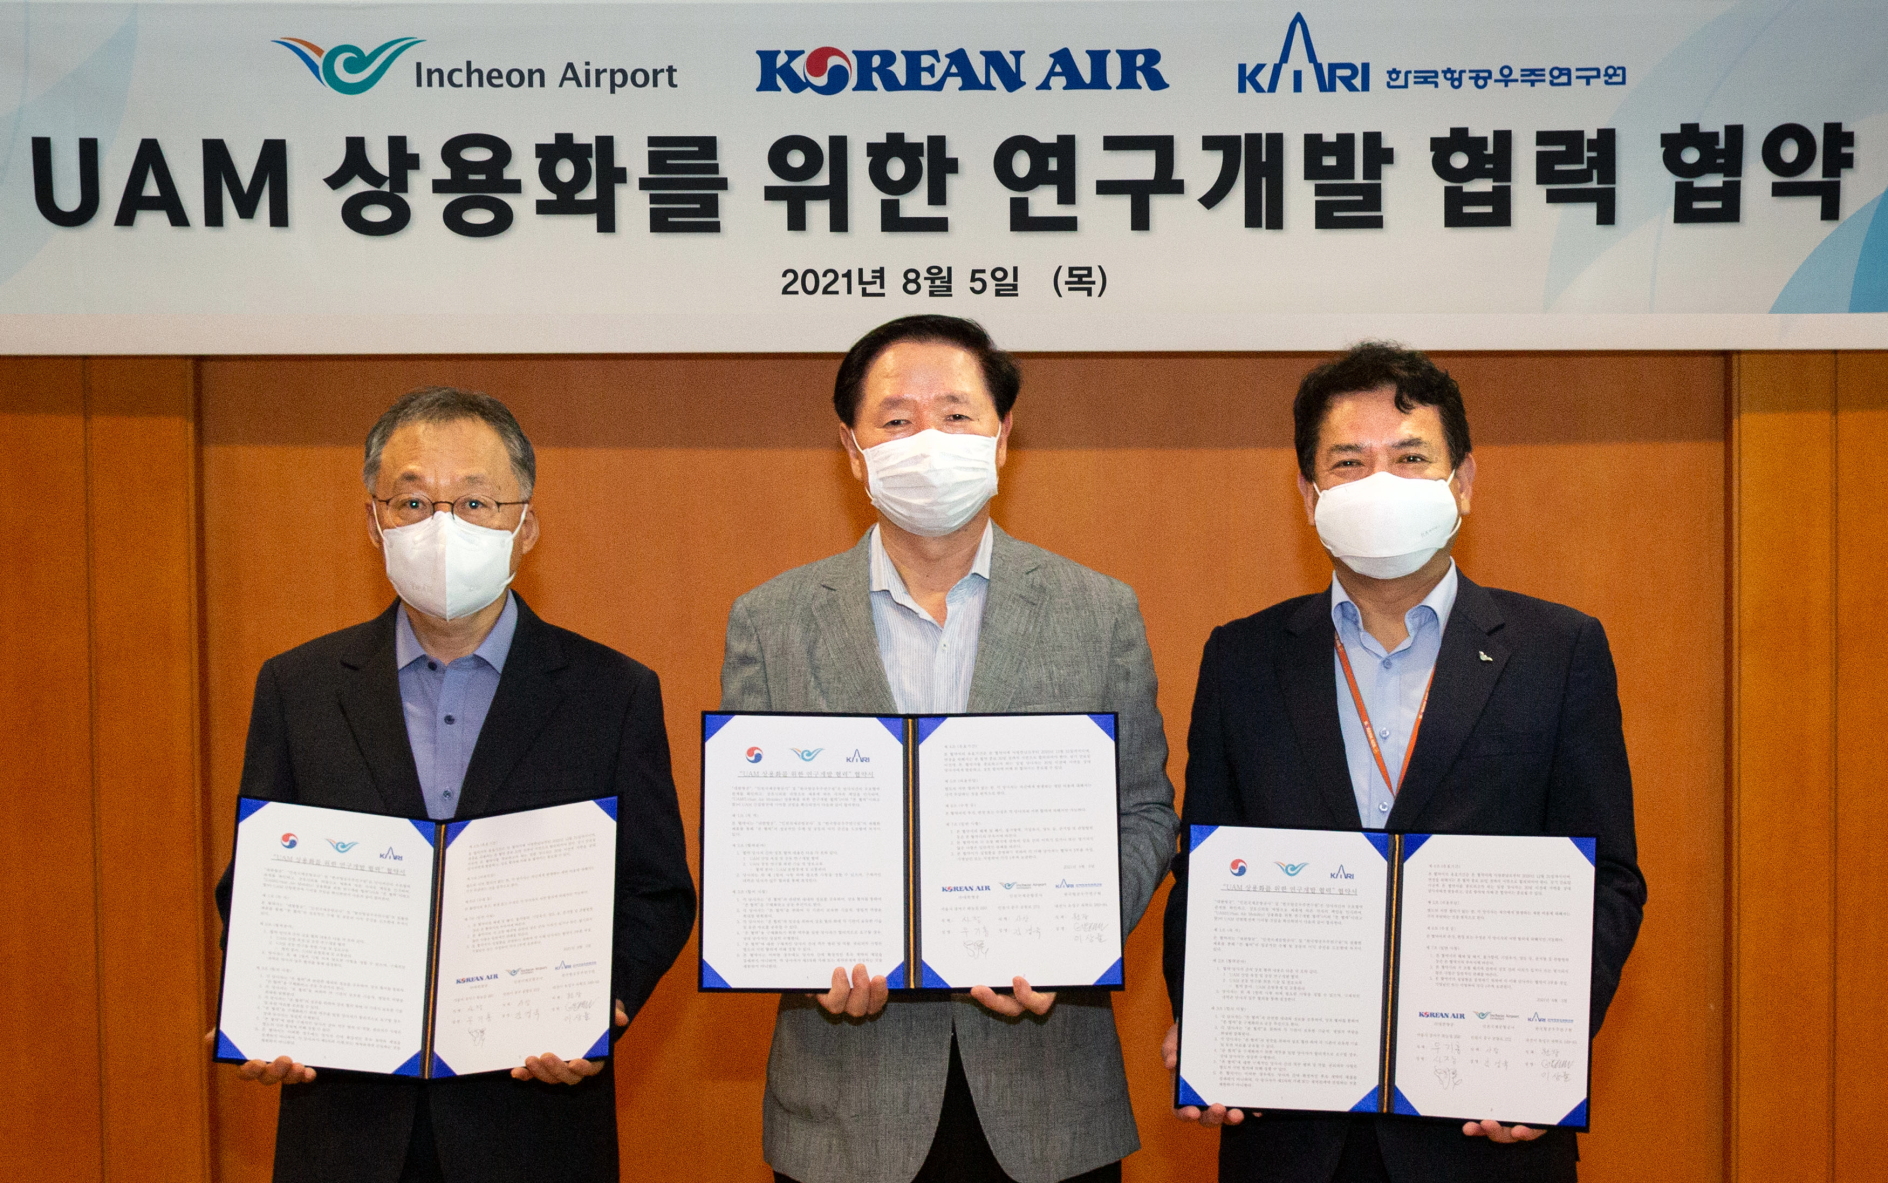 From left to right: Mr. Lee Sang-Rryool, President of Korea Aerospace Research Institute; Mr. WOO Keehong, President of Korean Air; and Mr. KIM Kyung Wook, CEO of Incheon International Airport Corporation. Click to enlarge.